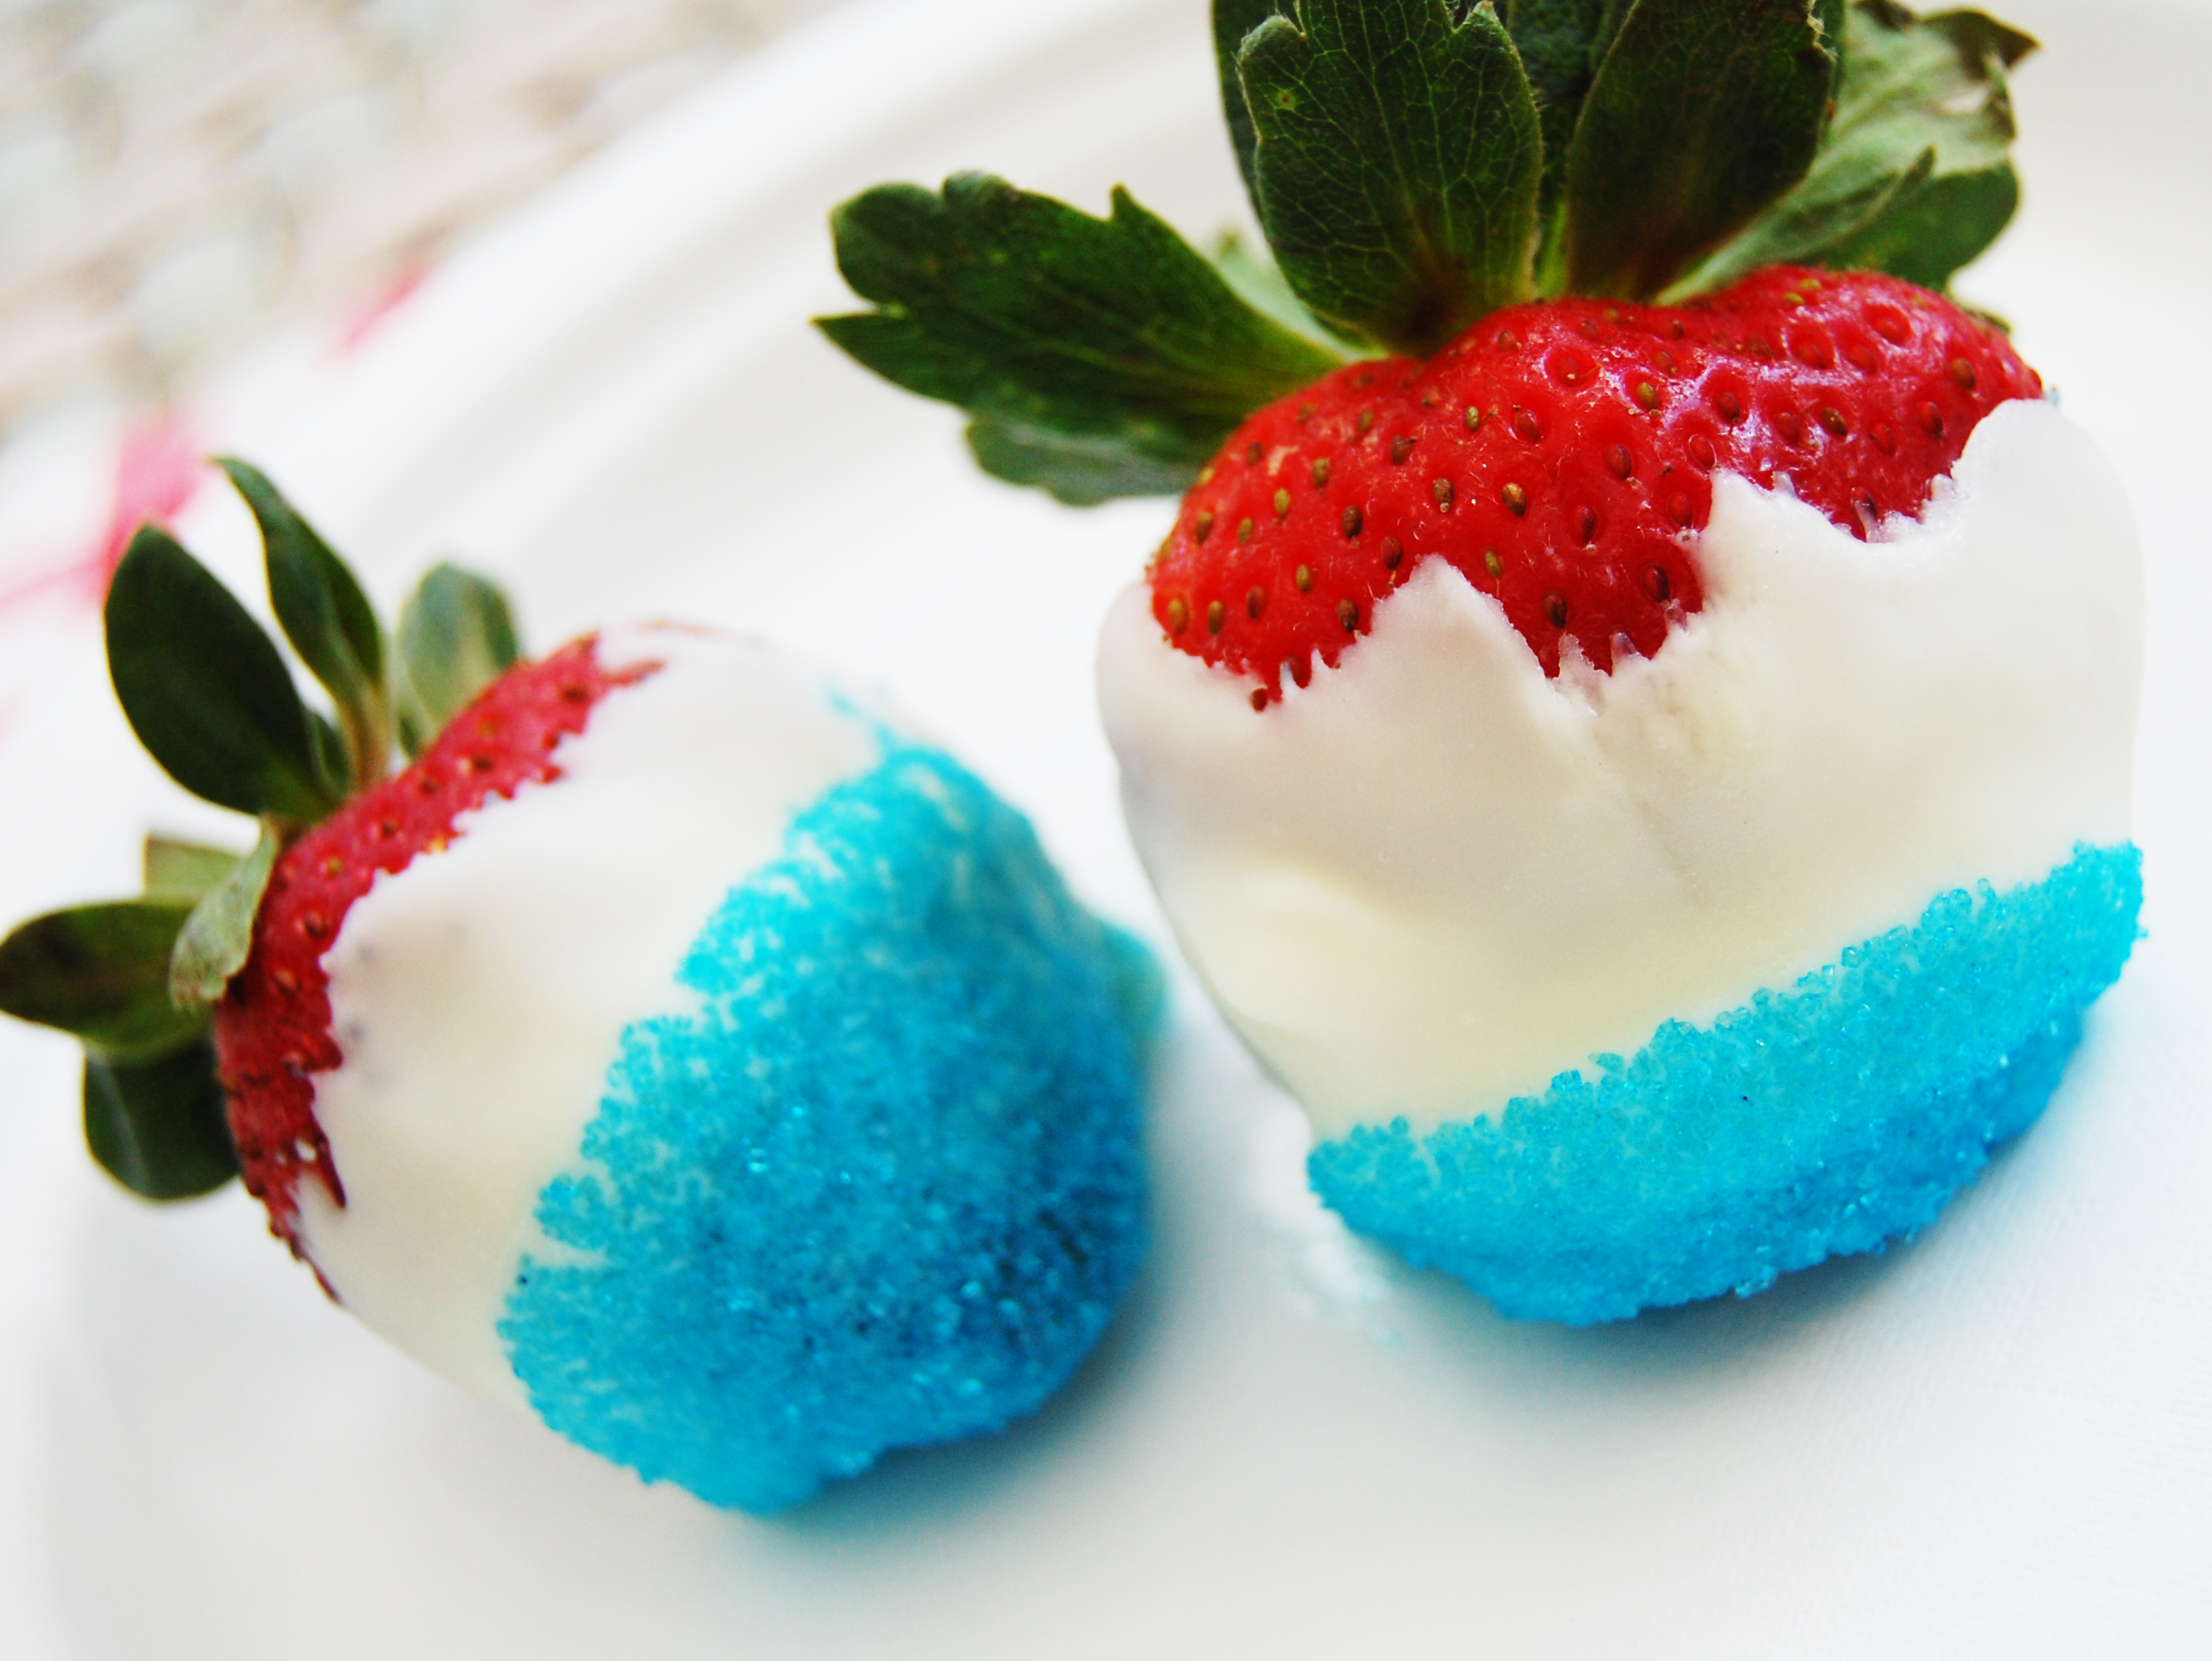 red, white, and blue strawberries